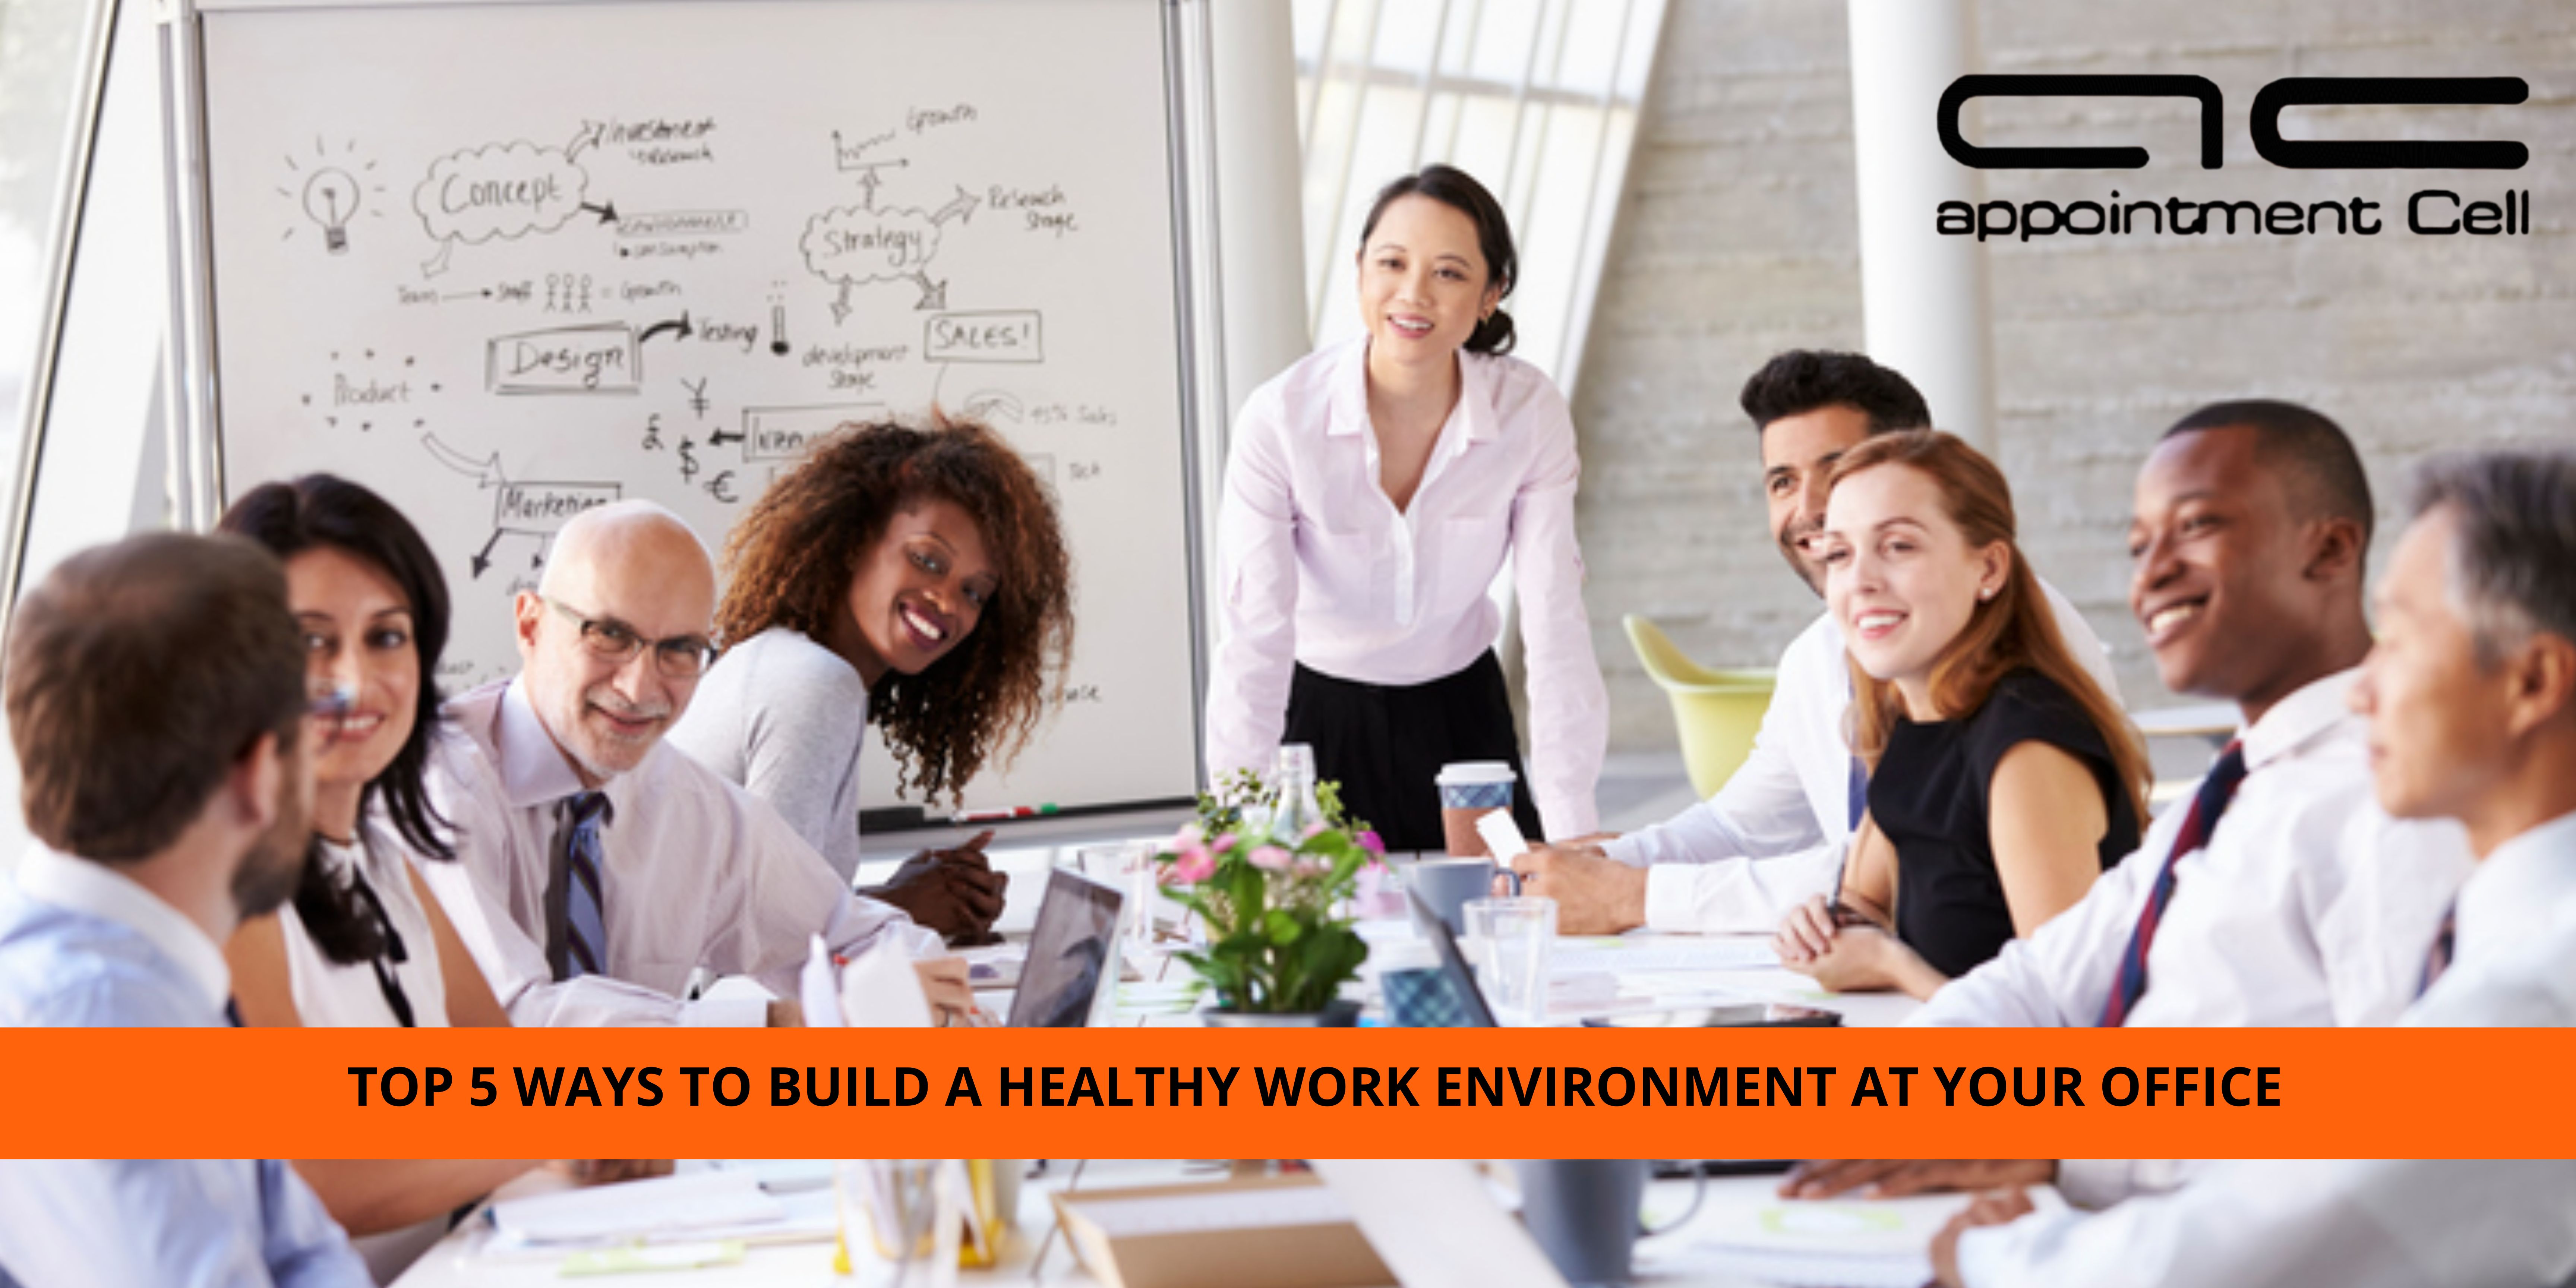 TOP 5 WAYS TO BUILD A HEALTHY WORK ENVIRONMENT AT YOUR OFFICE